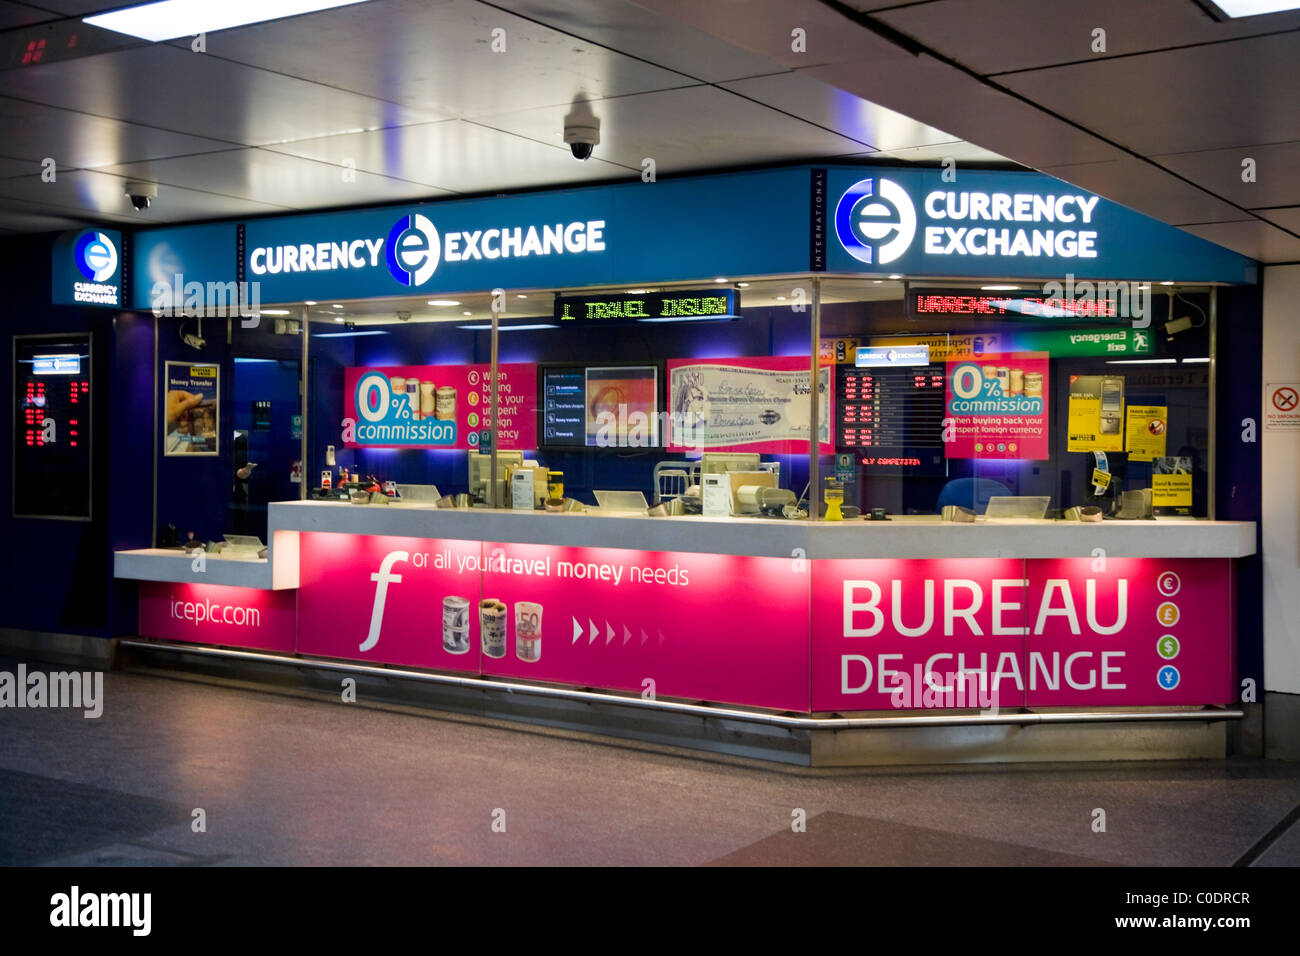 Bureau de Change office operated by International Currency Exchange – 'ICE'  Plc. South Terminal, Gatwick airport. London. UK Stock Photo - Alamy